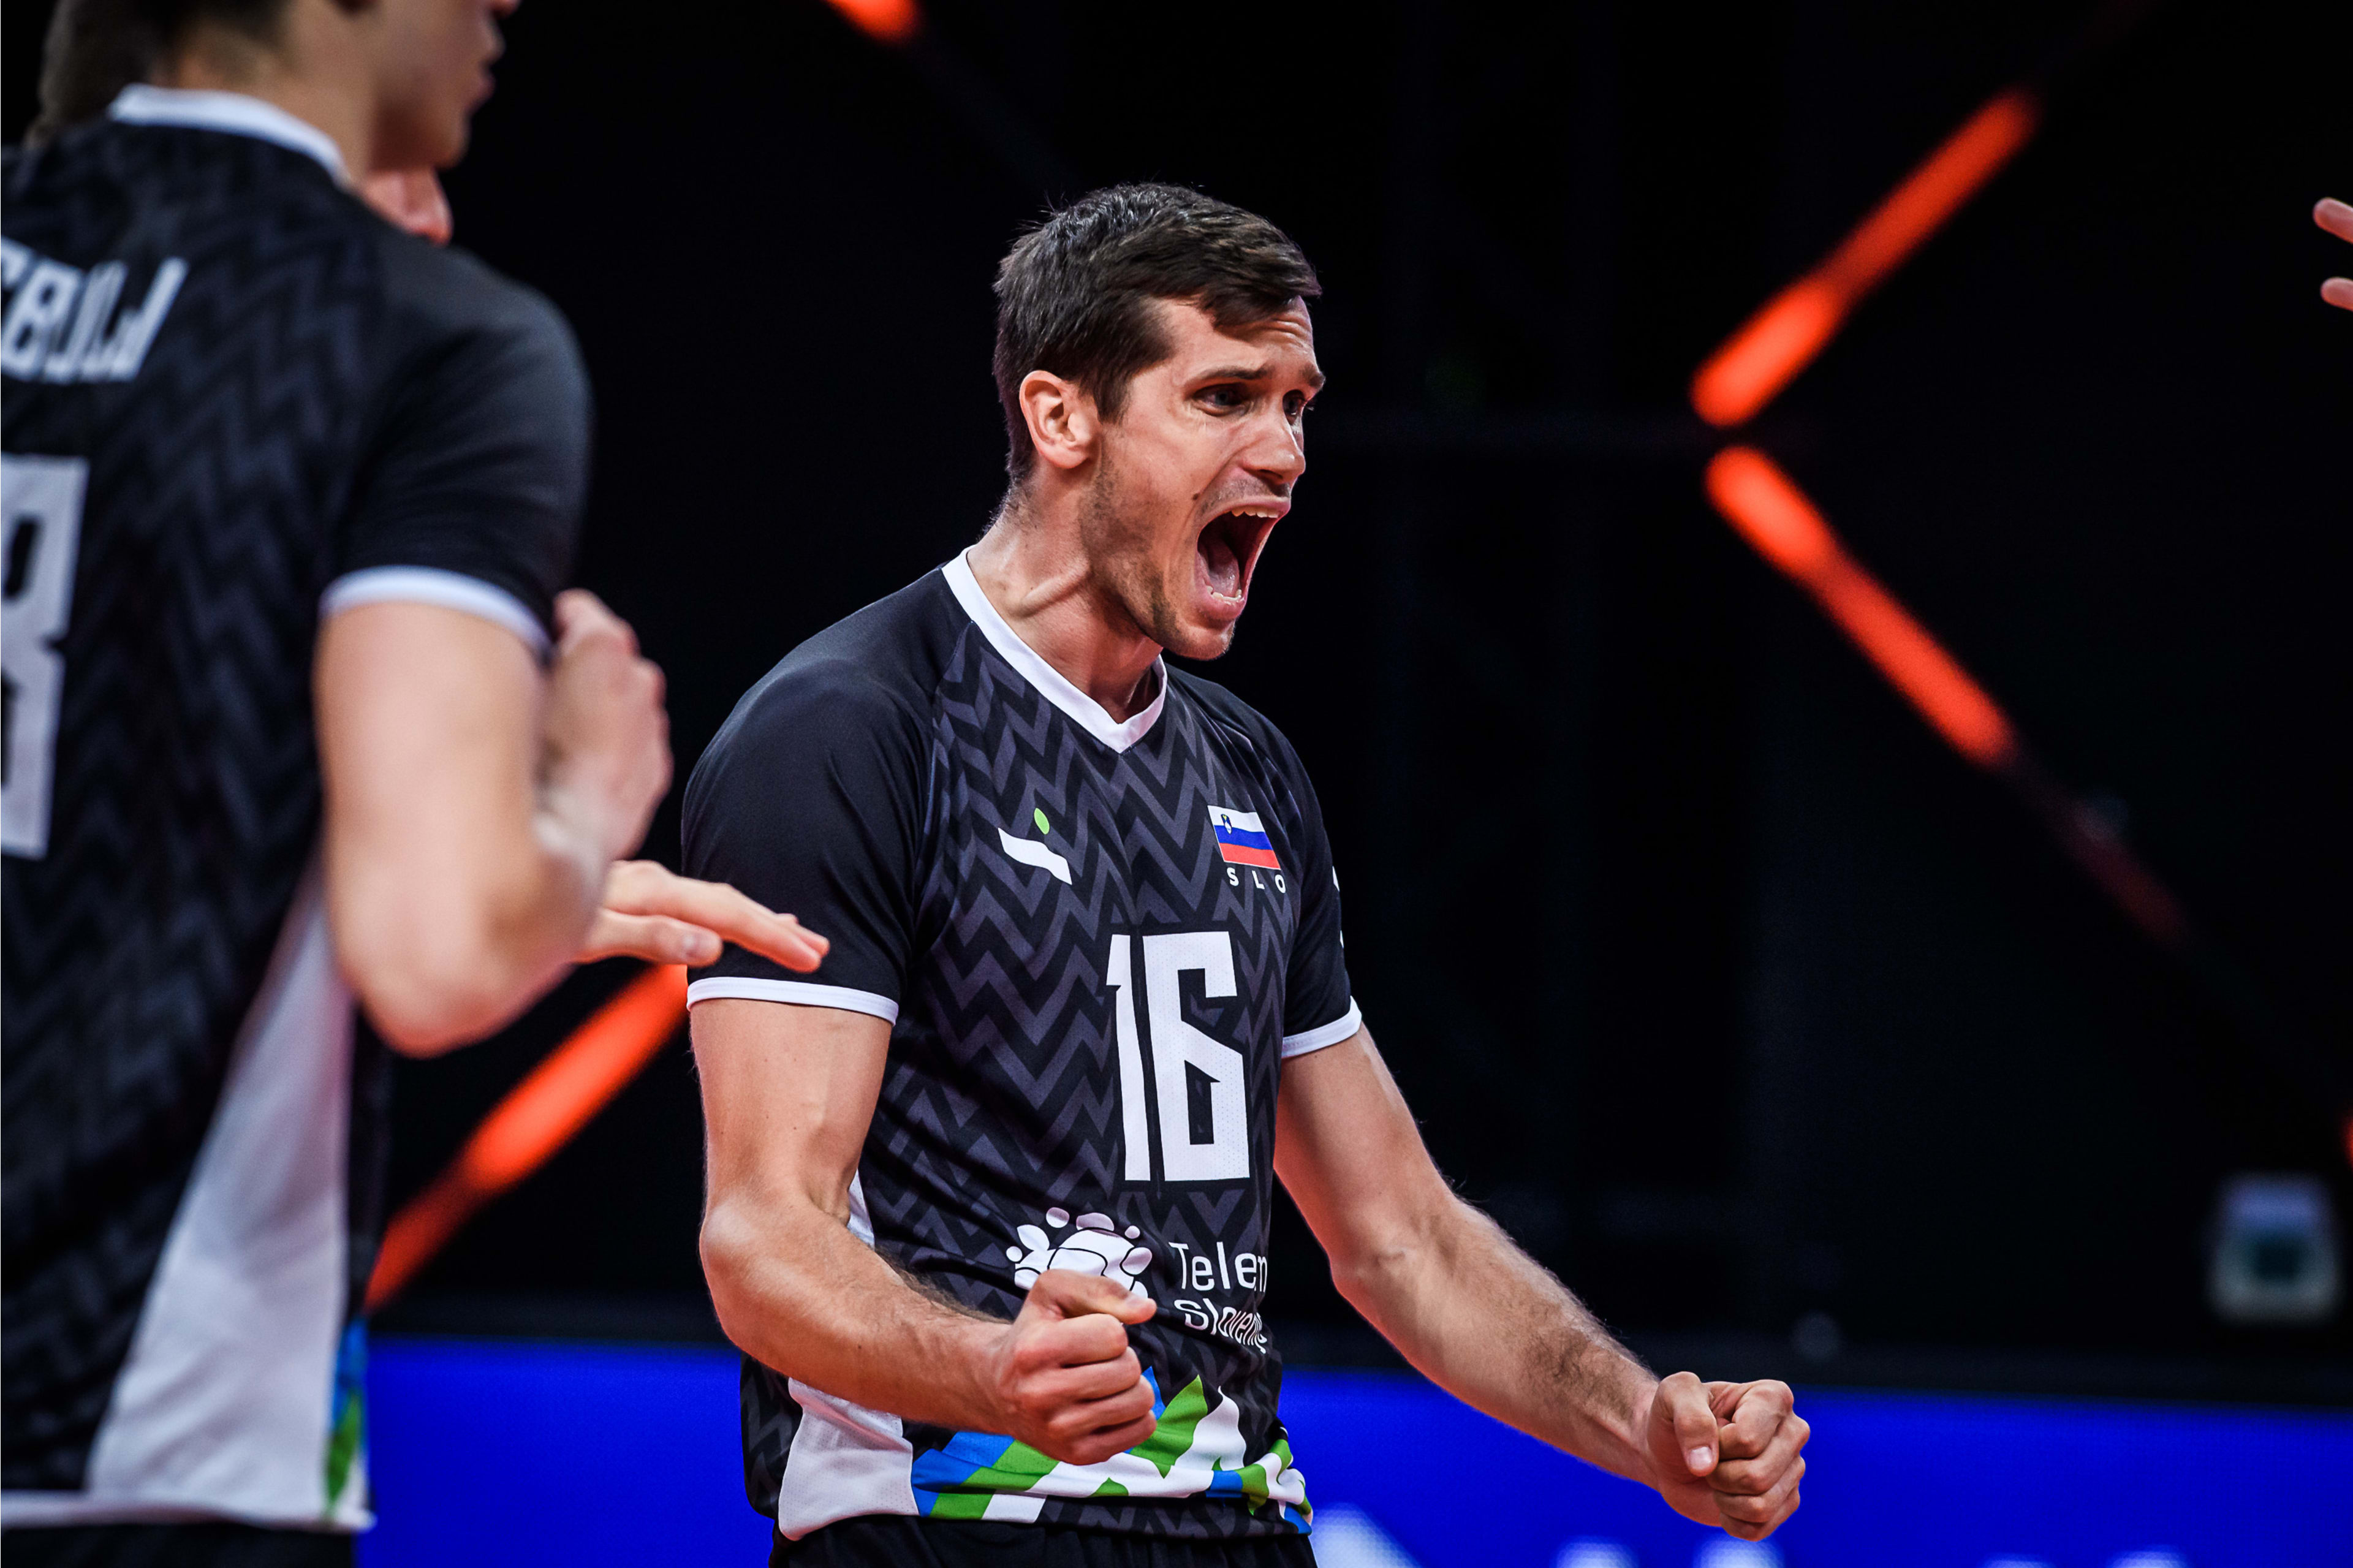 Medal contenders Slovenia and USA to clash on day one volleyballworld